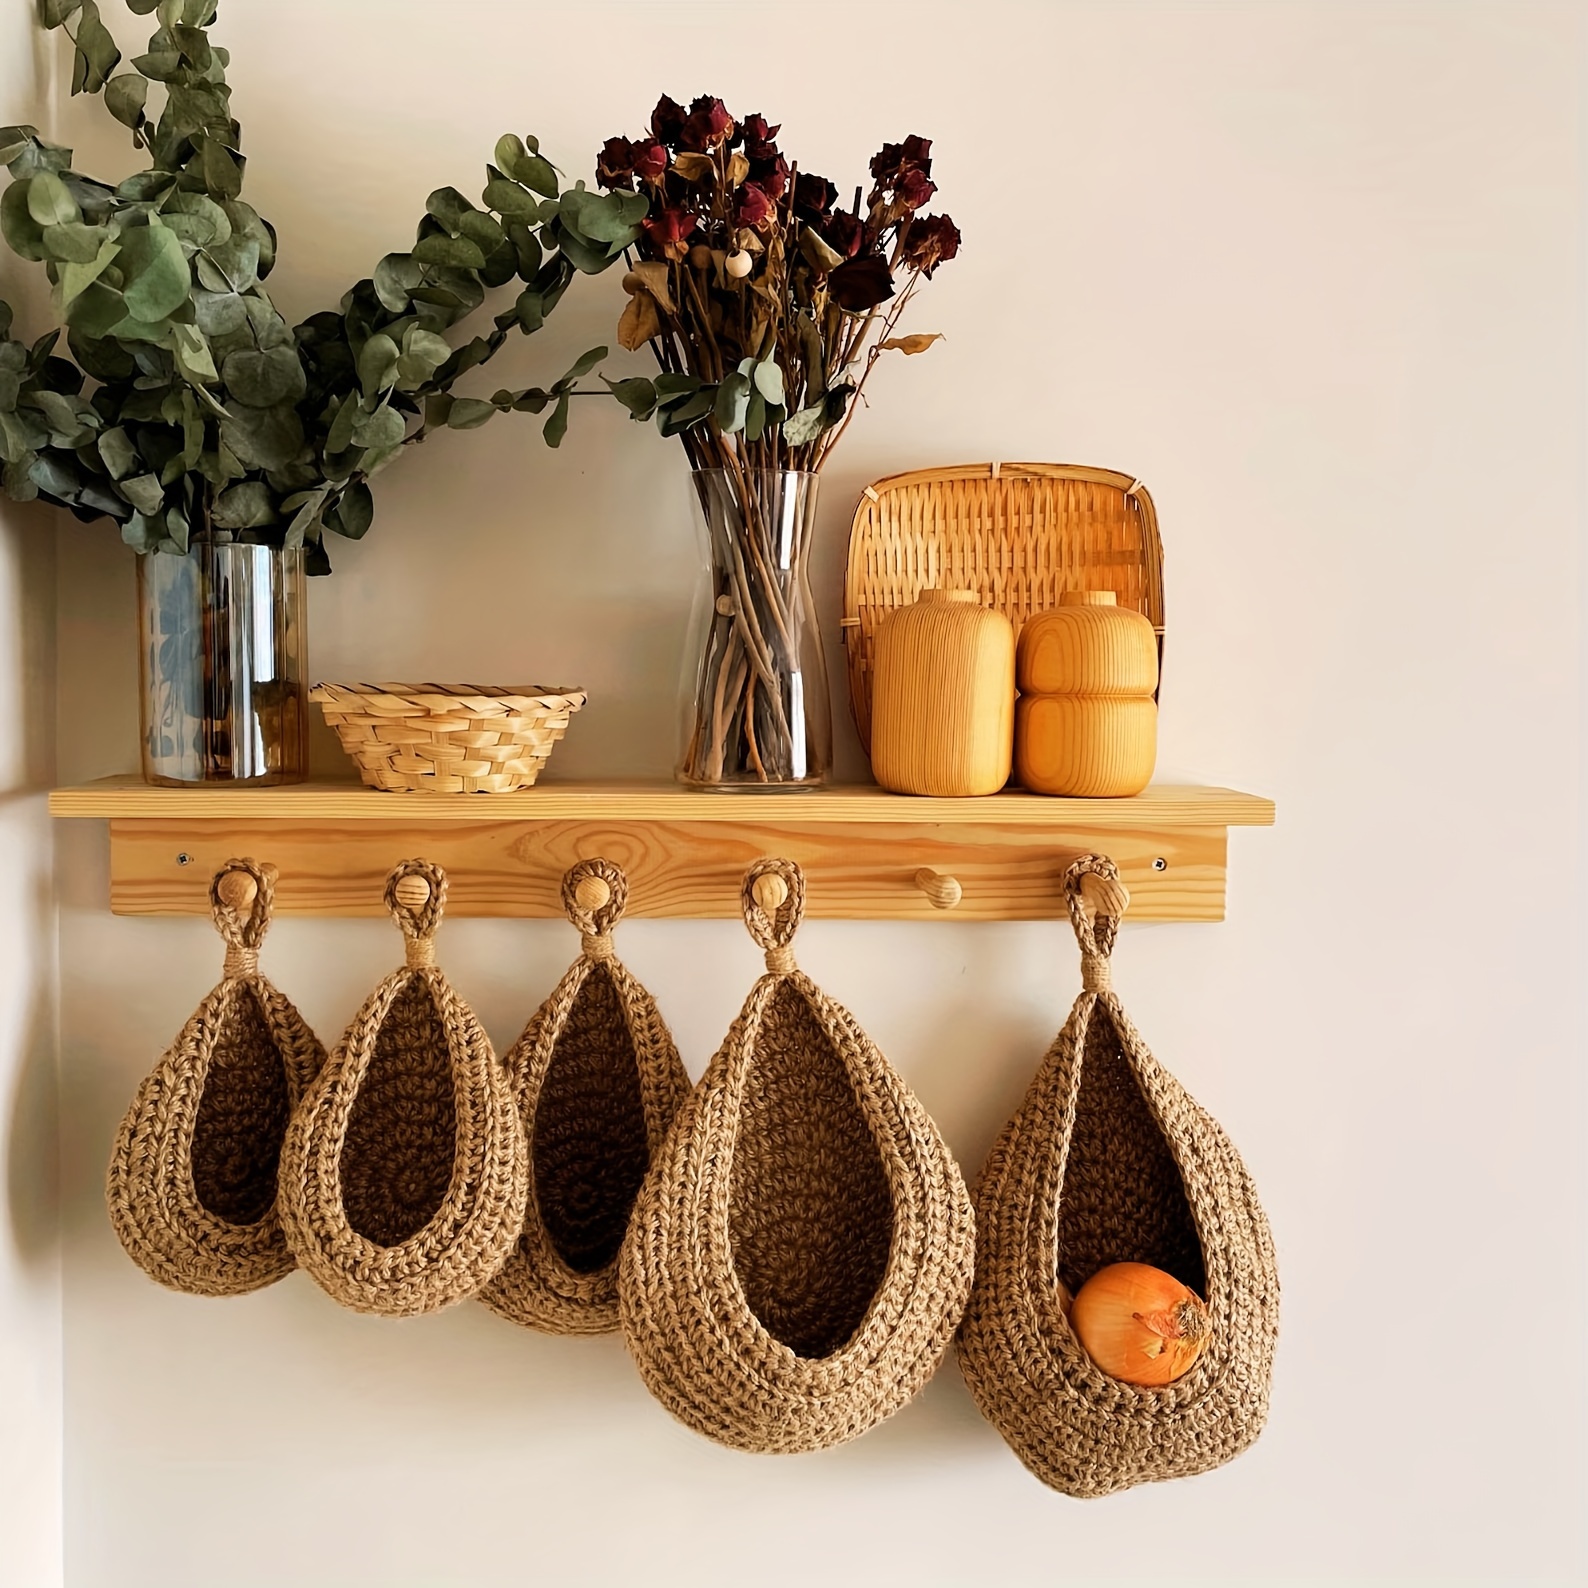 

Rustic Jute Wall-hanging Storage Baskets Set - Perfect For Fruits, Vegetables & Kitchen Organization